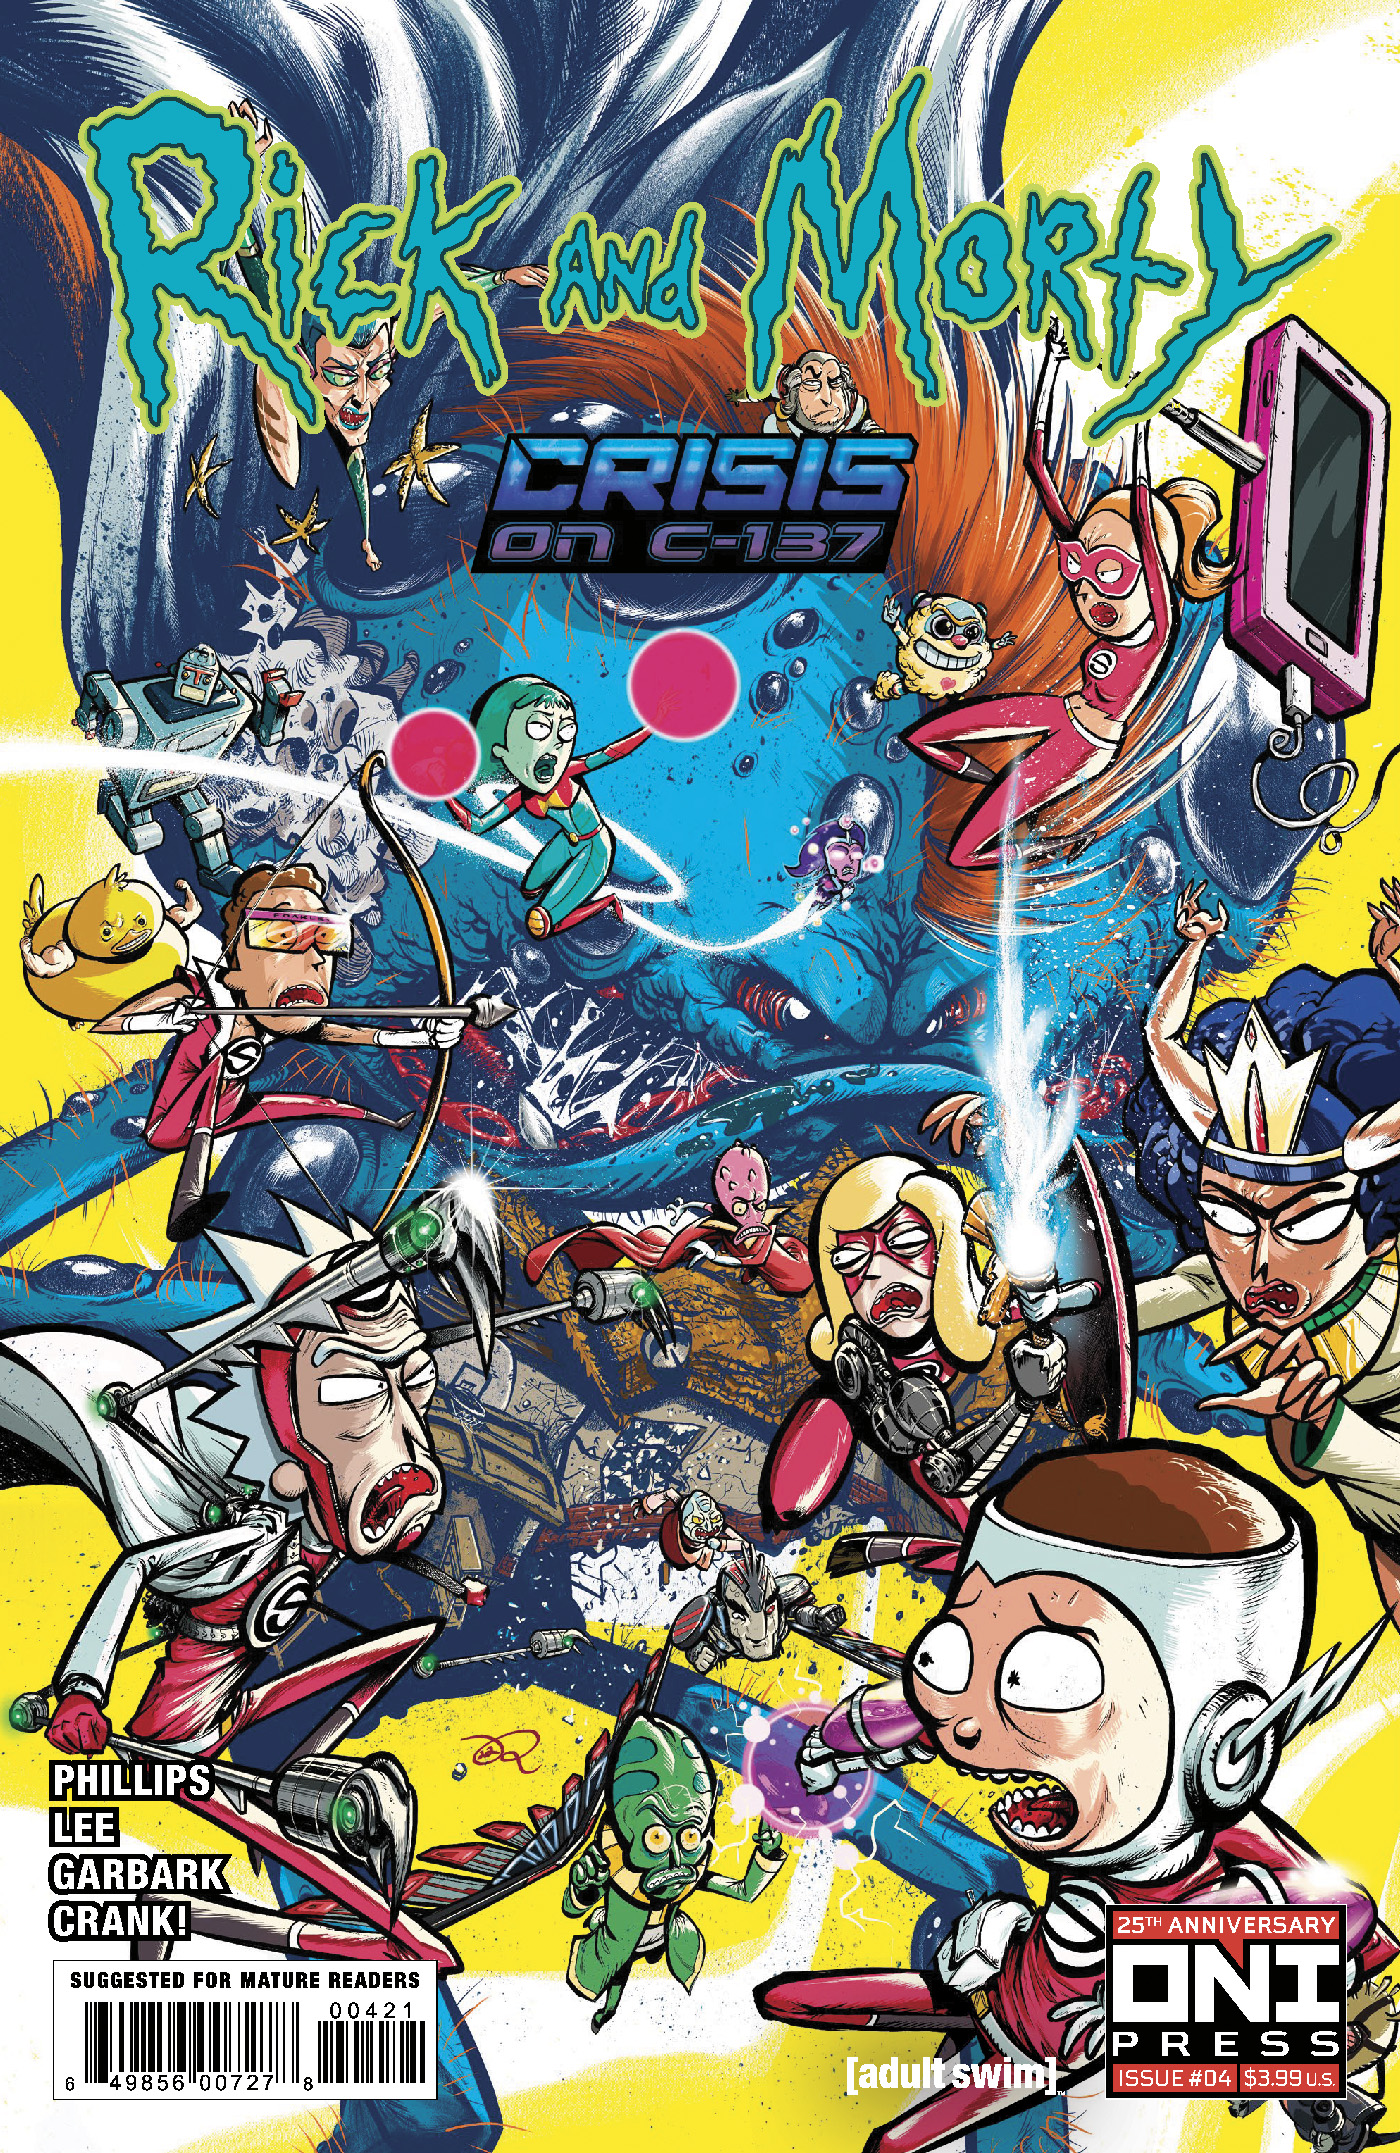 Rick and Morty Crisis On C 137 #4 Cover A Ryan Lee (Mature) (Of 4)